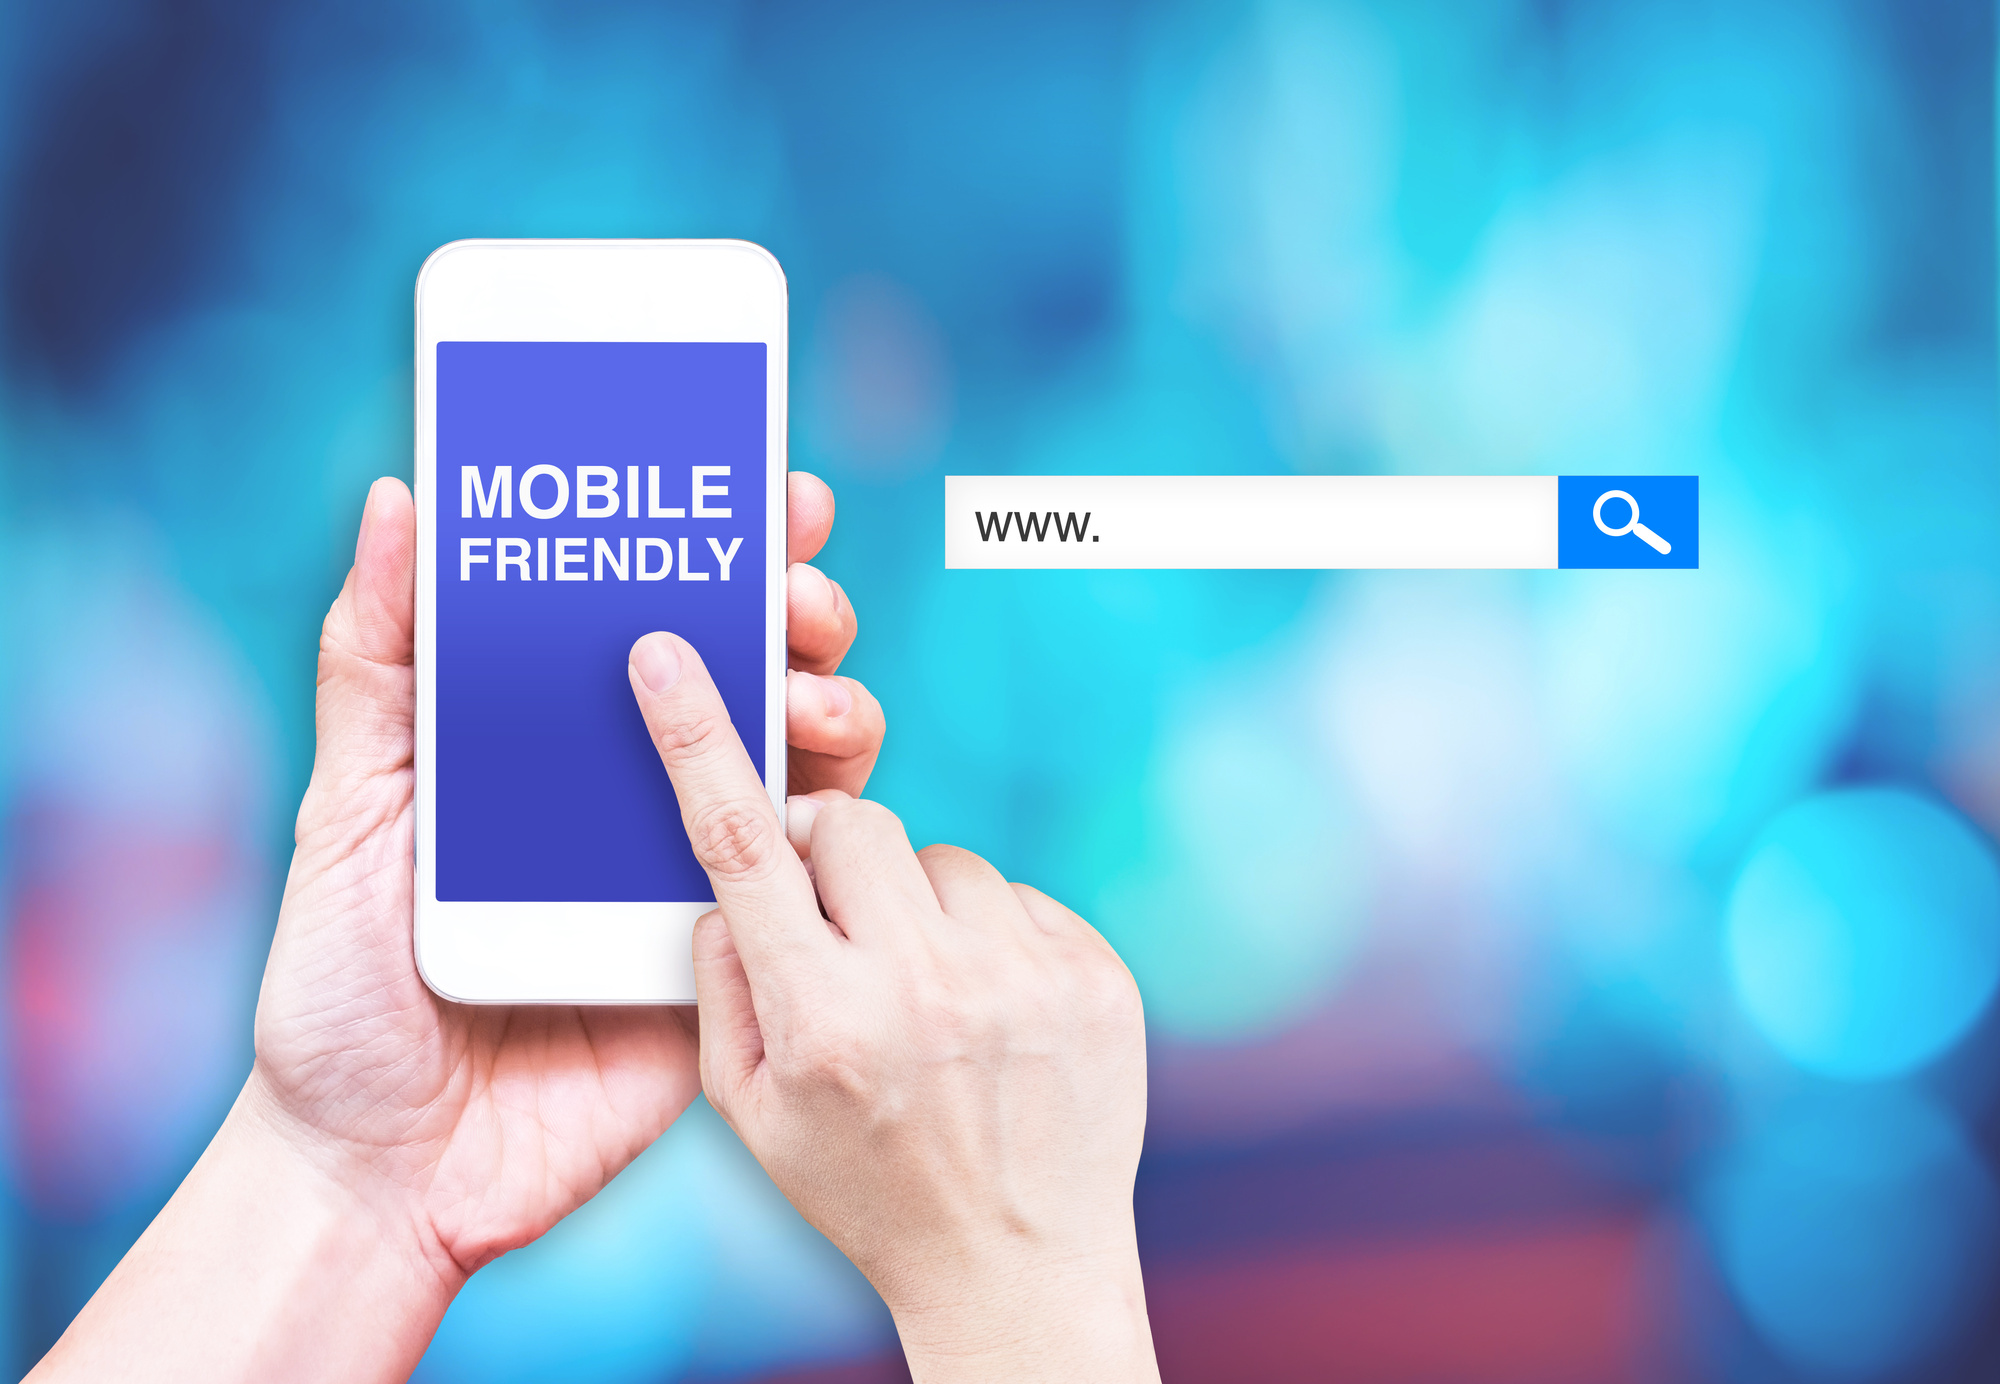 MAKE YOUR WEBSITE SMART PHONE FRIENDLY